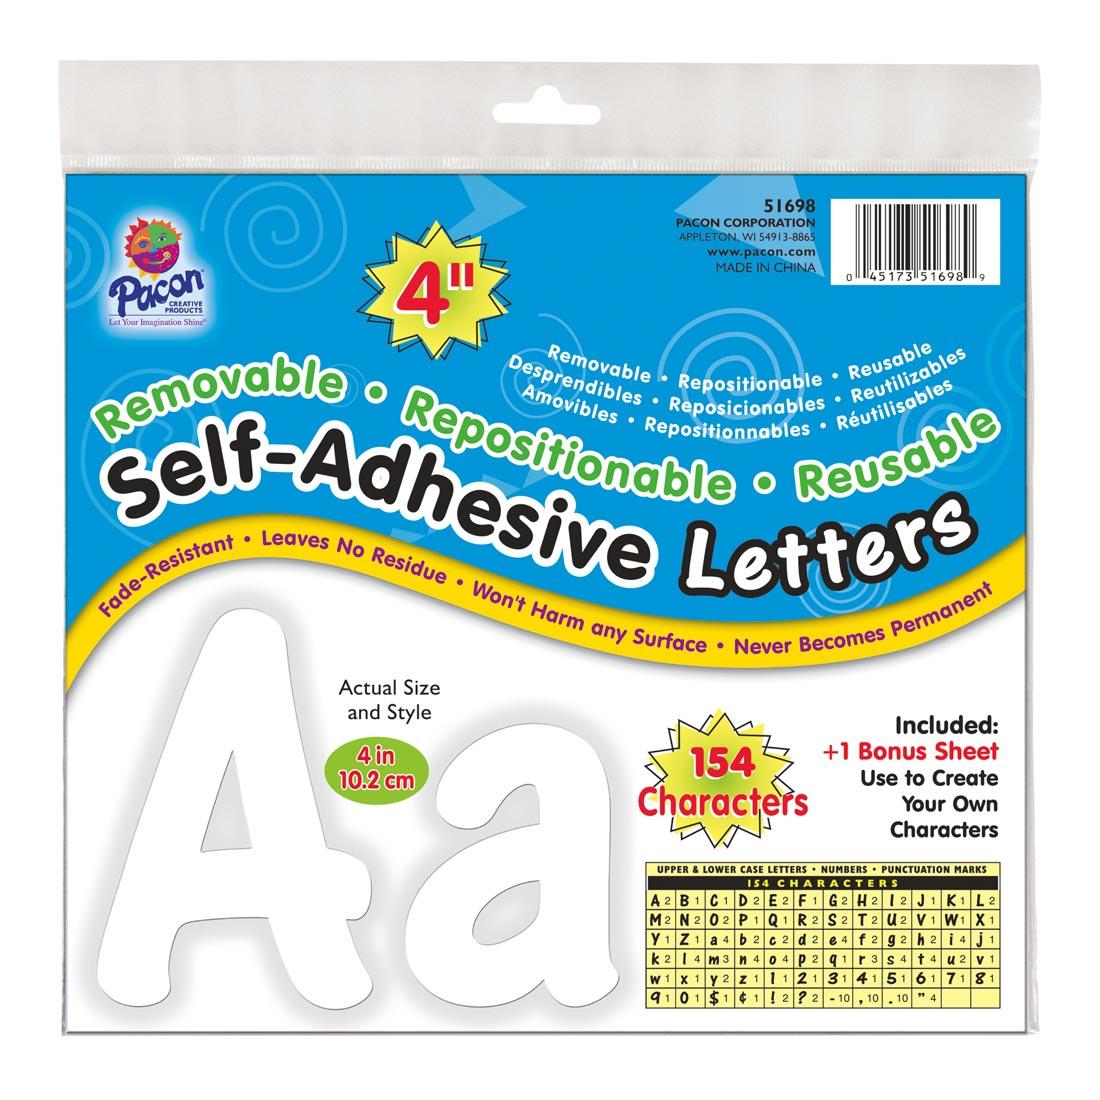 Pacon Reusable Self-Adhesive Vinyl Letters & Numbers Cheery Font 4" White